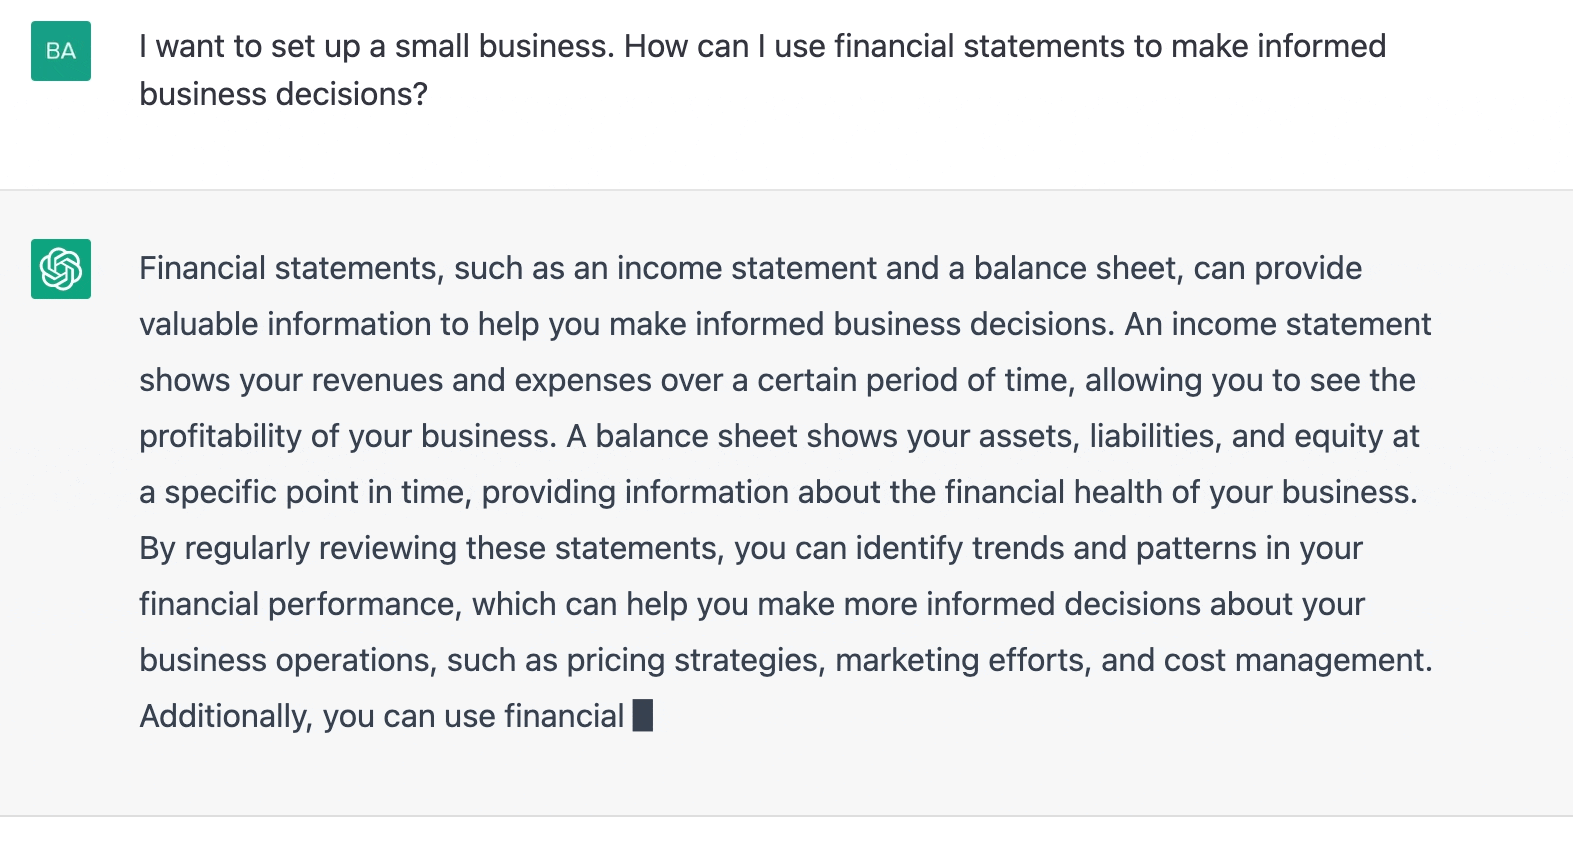 ChatGPT prompt about how to use financial statements to make informed business decisions